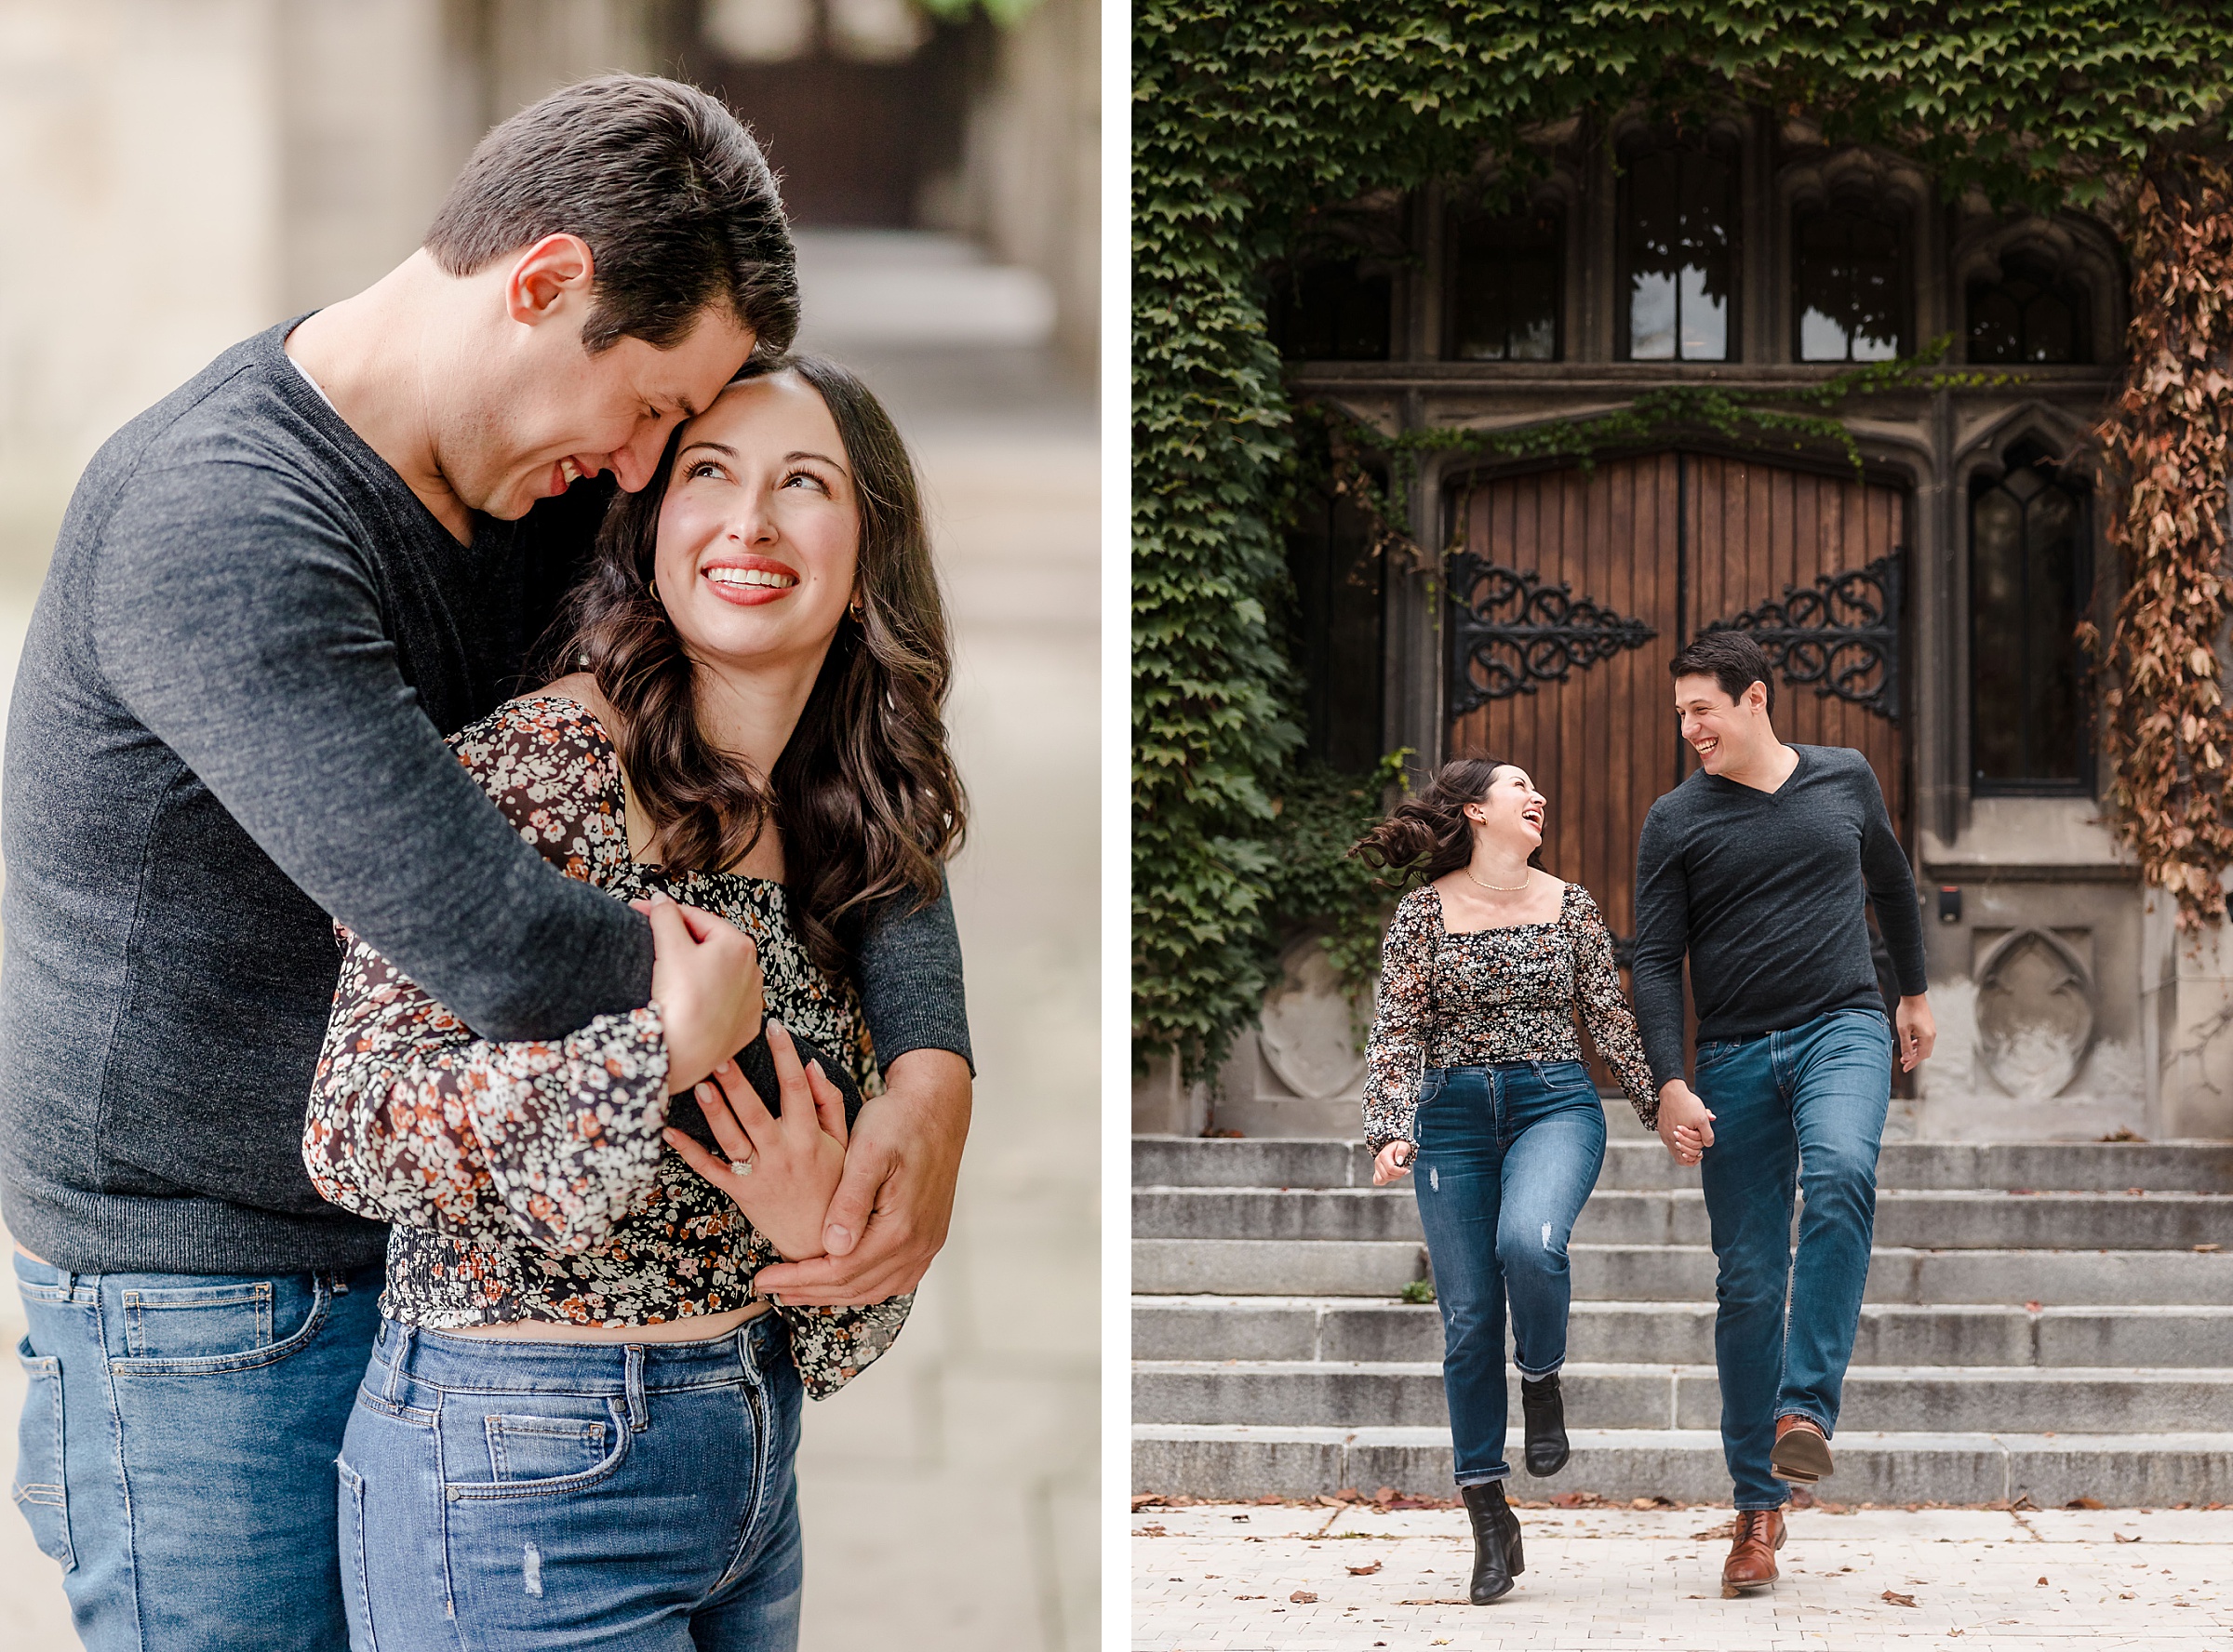 Couple embrace during their engagement session at the University of Chicago in Chicago, Illinois.